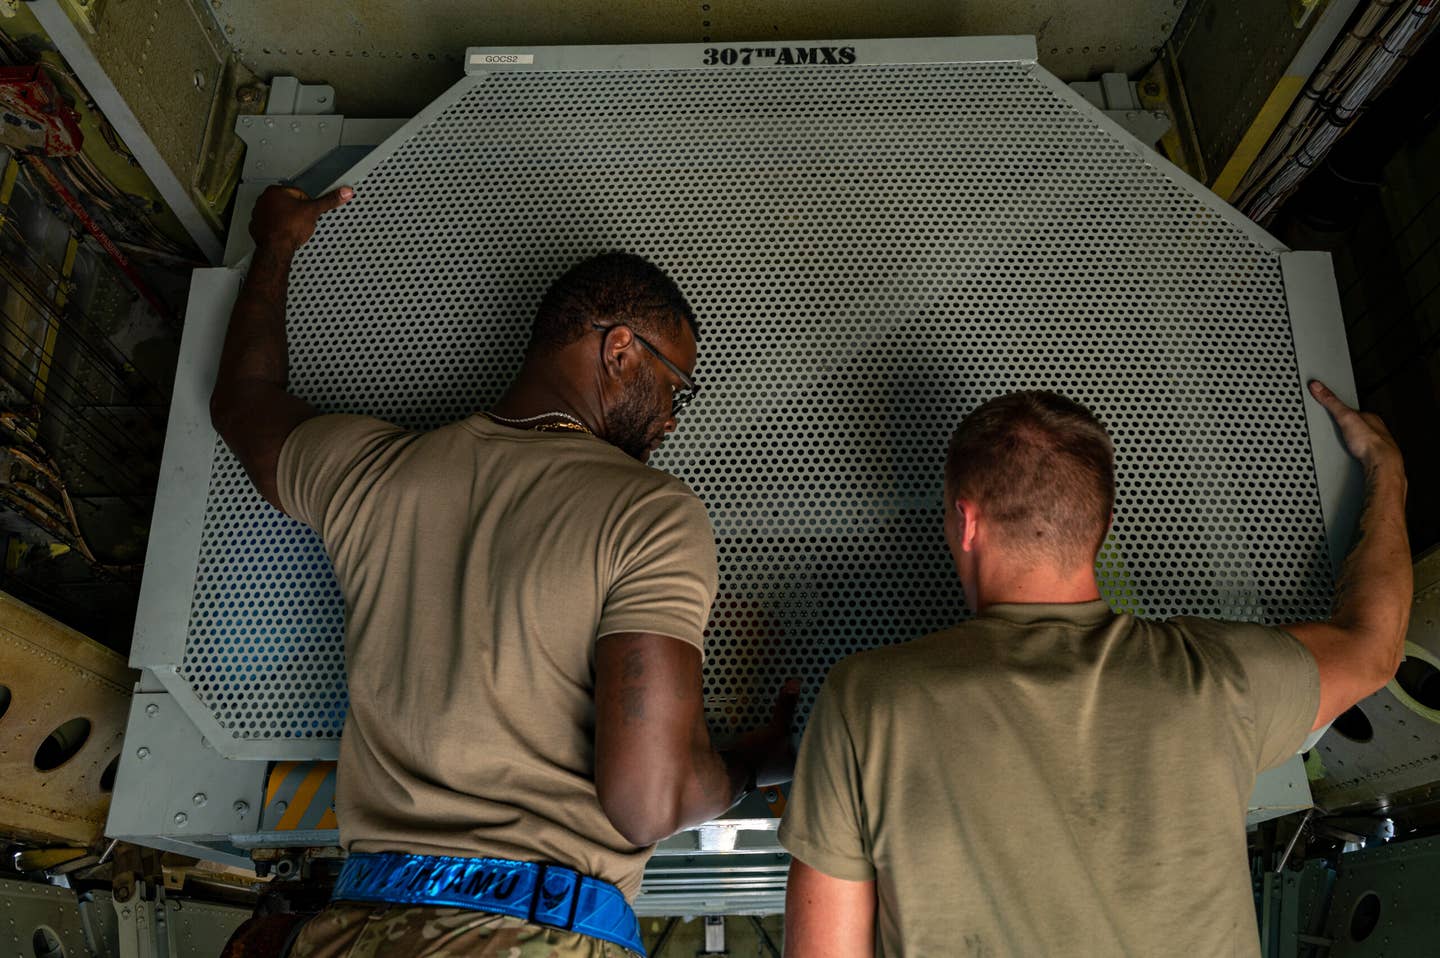 Master Sgt. Anthony Williams Jr., left, 2nd Aircraft Maintenance Squadron production supervisor, and Senior Airman Aaron Wiles, right, 2nd Aircraft Maintenance Squadron engine mechanic, remove the outer wall of an On-board Cargo System inside a B-52H at Fairchild Air Force Base. <em>Credit: Senior Airman Chase Sullivan/U.S. Air Force</em>